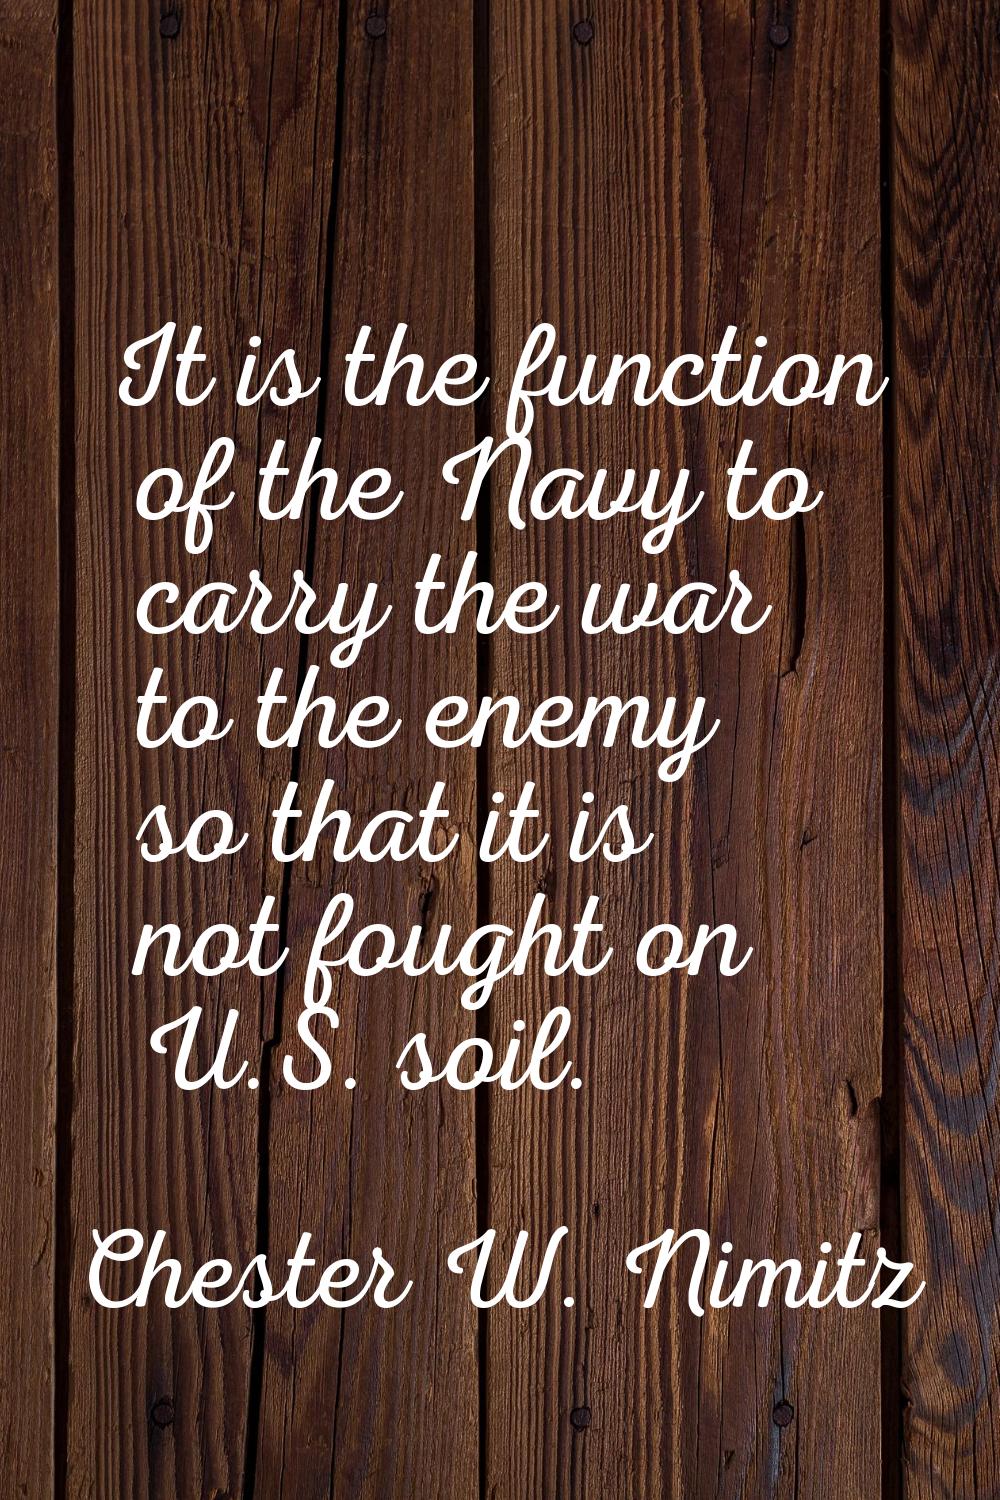 It is the function of the Navy to carry the war to the enemy so that it is not fought on U.S. soil.